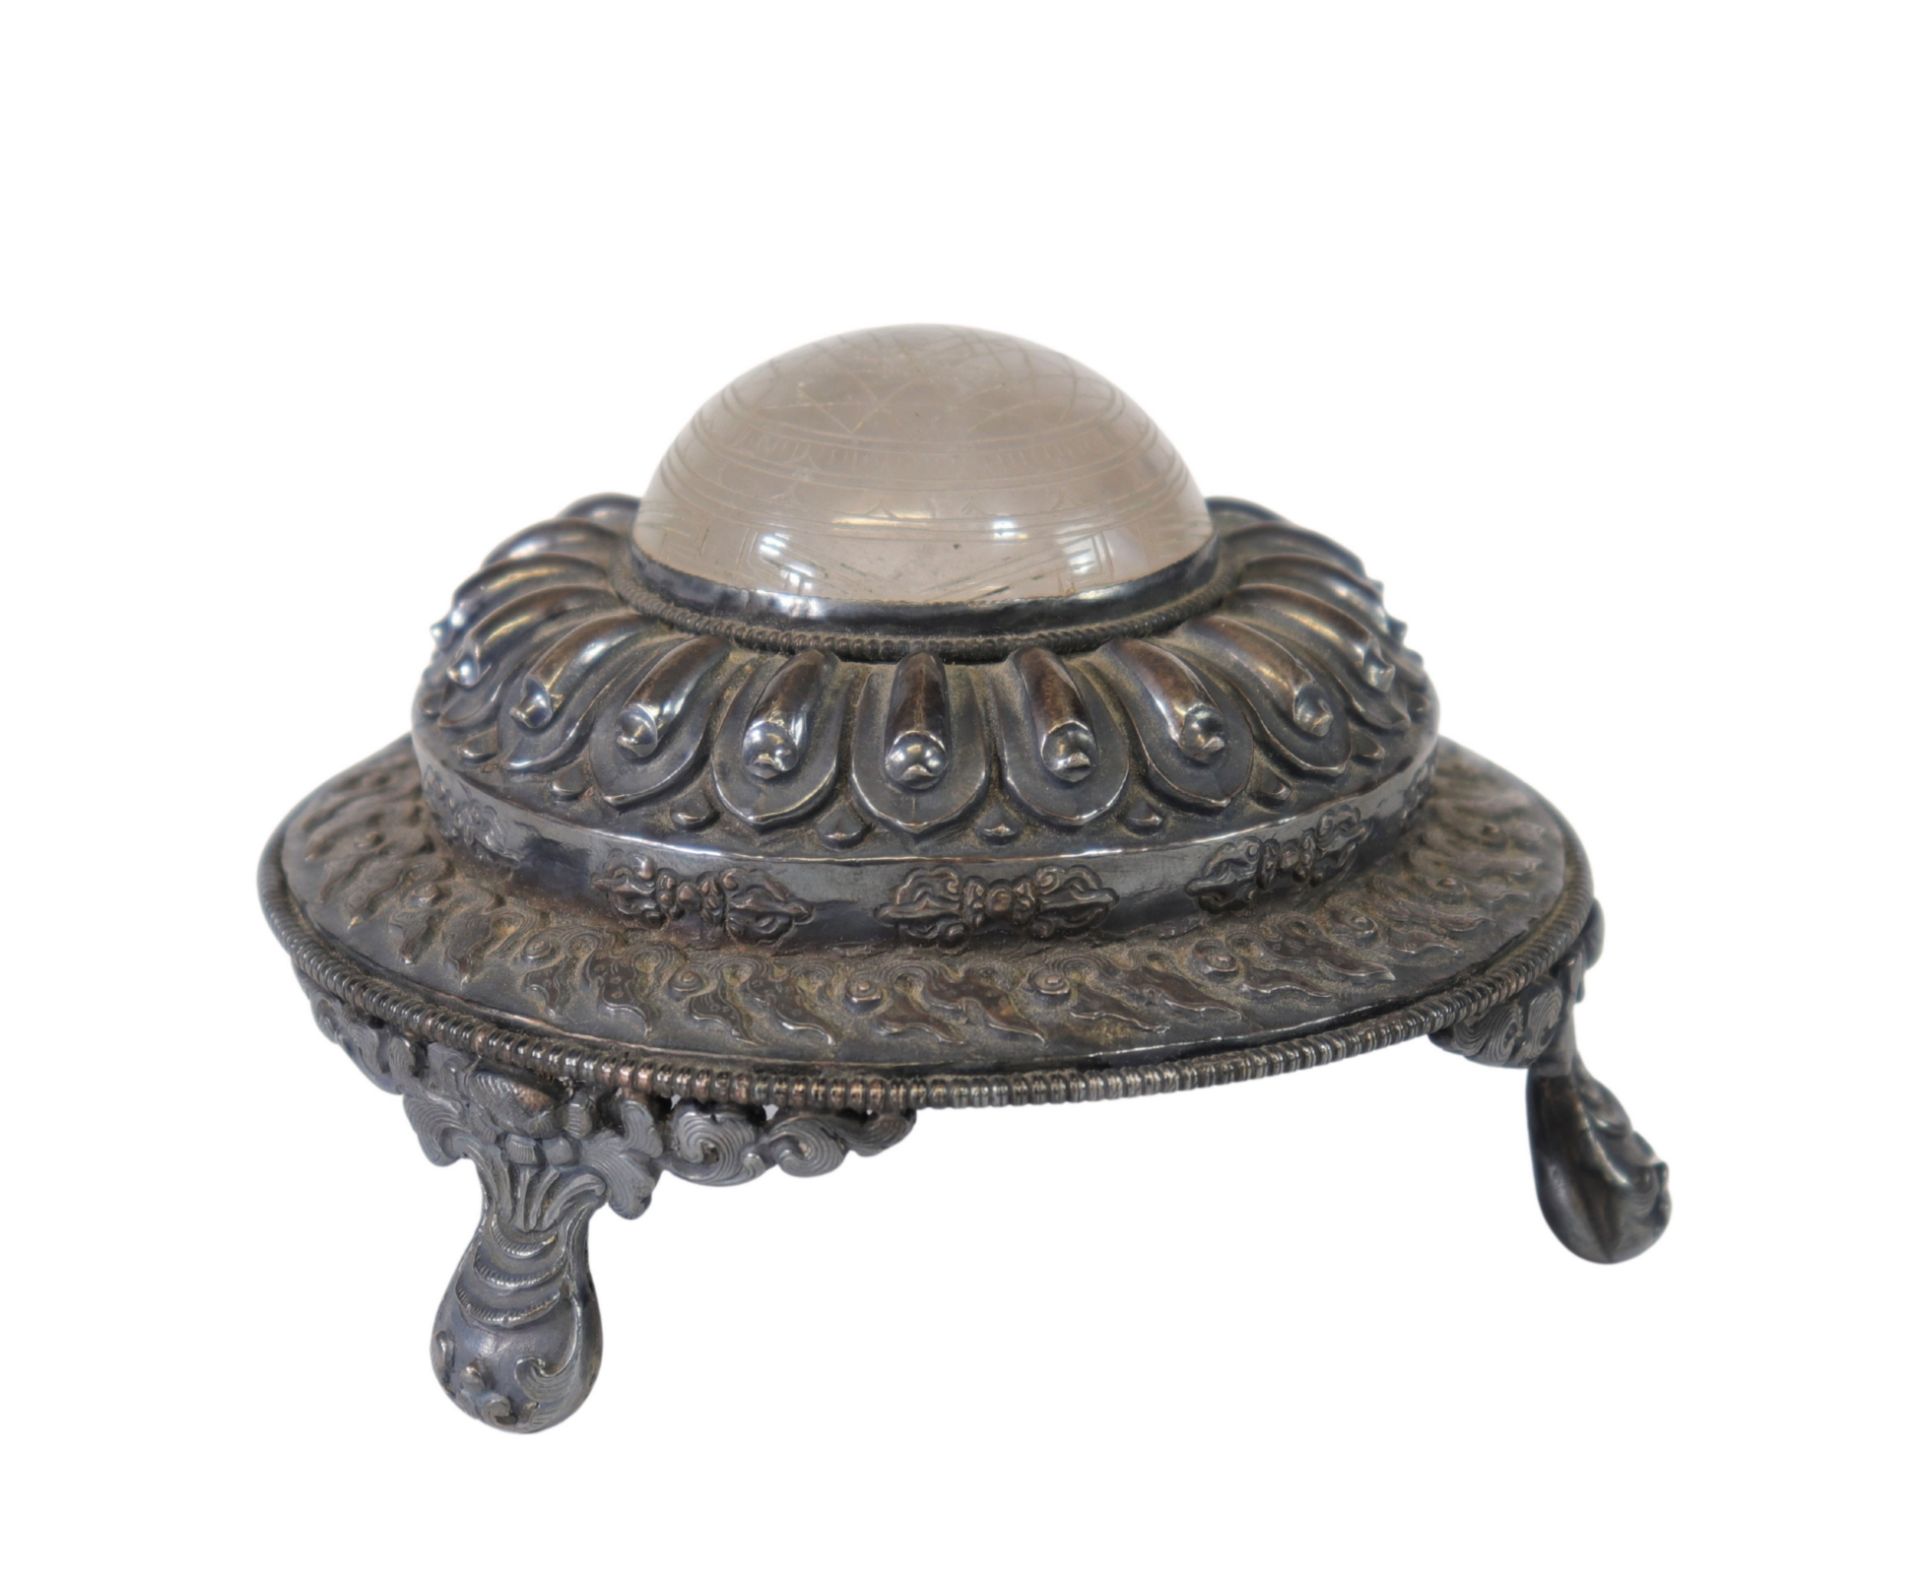 China, Silver literate object mounted on rock crystal, cut